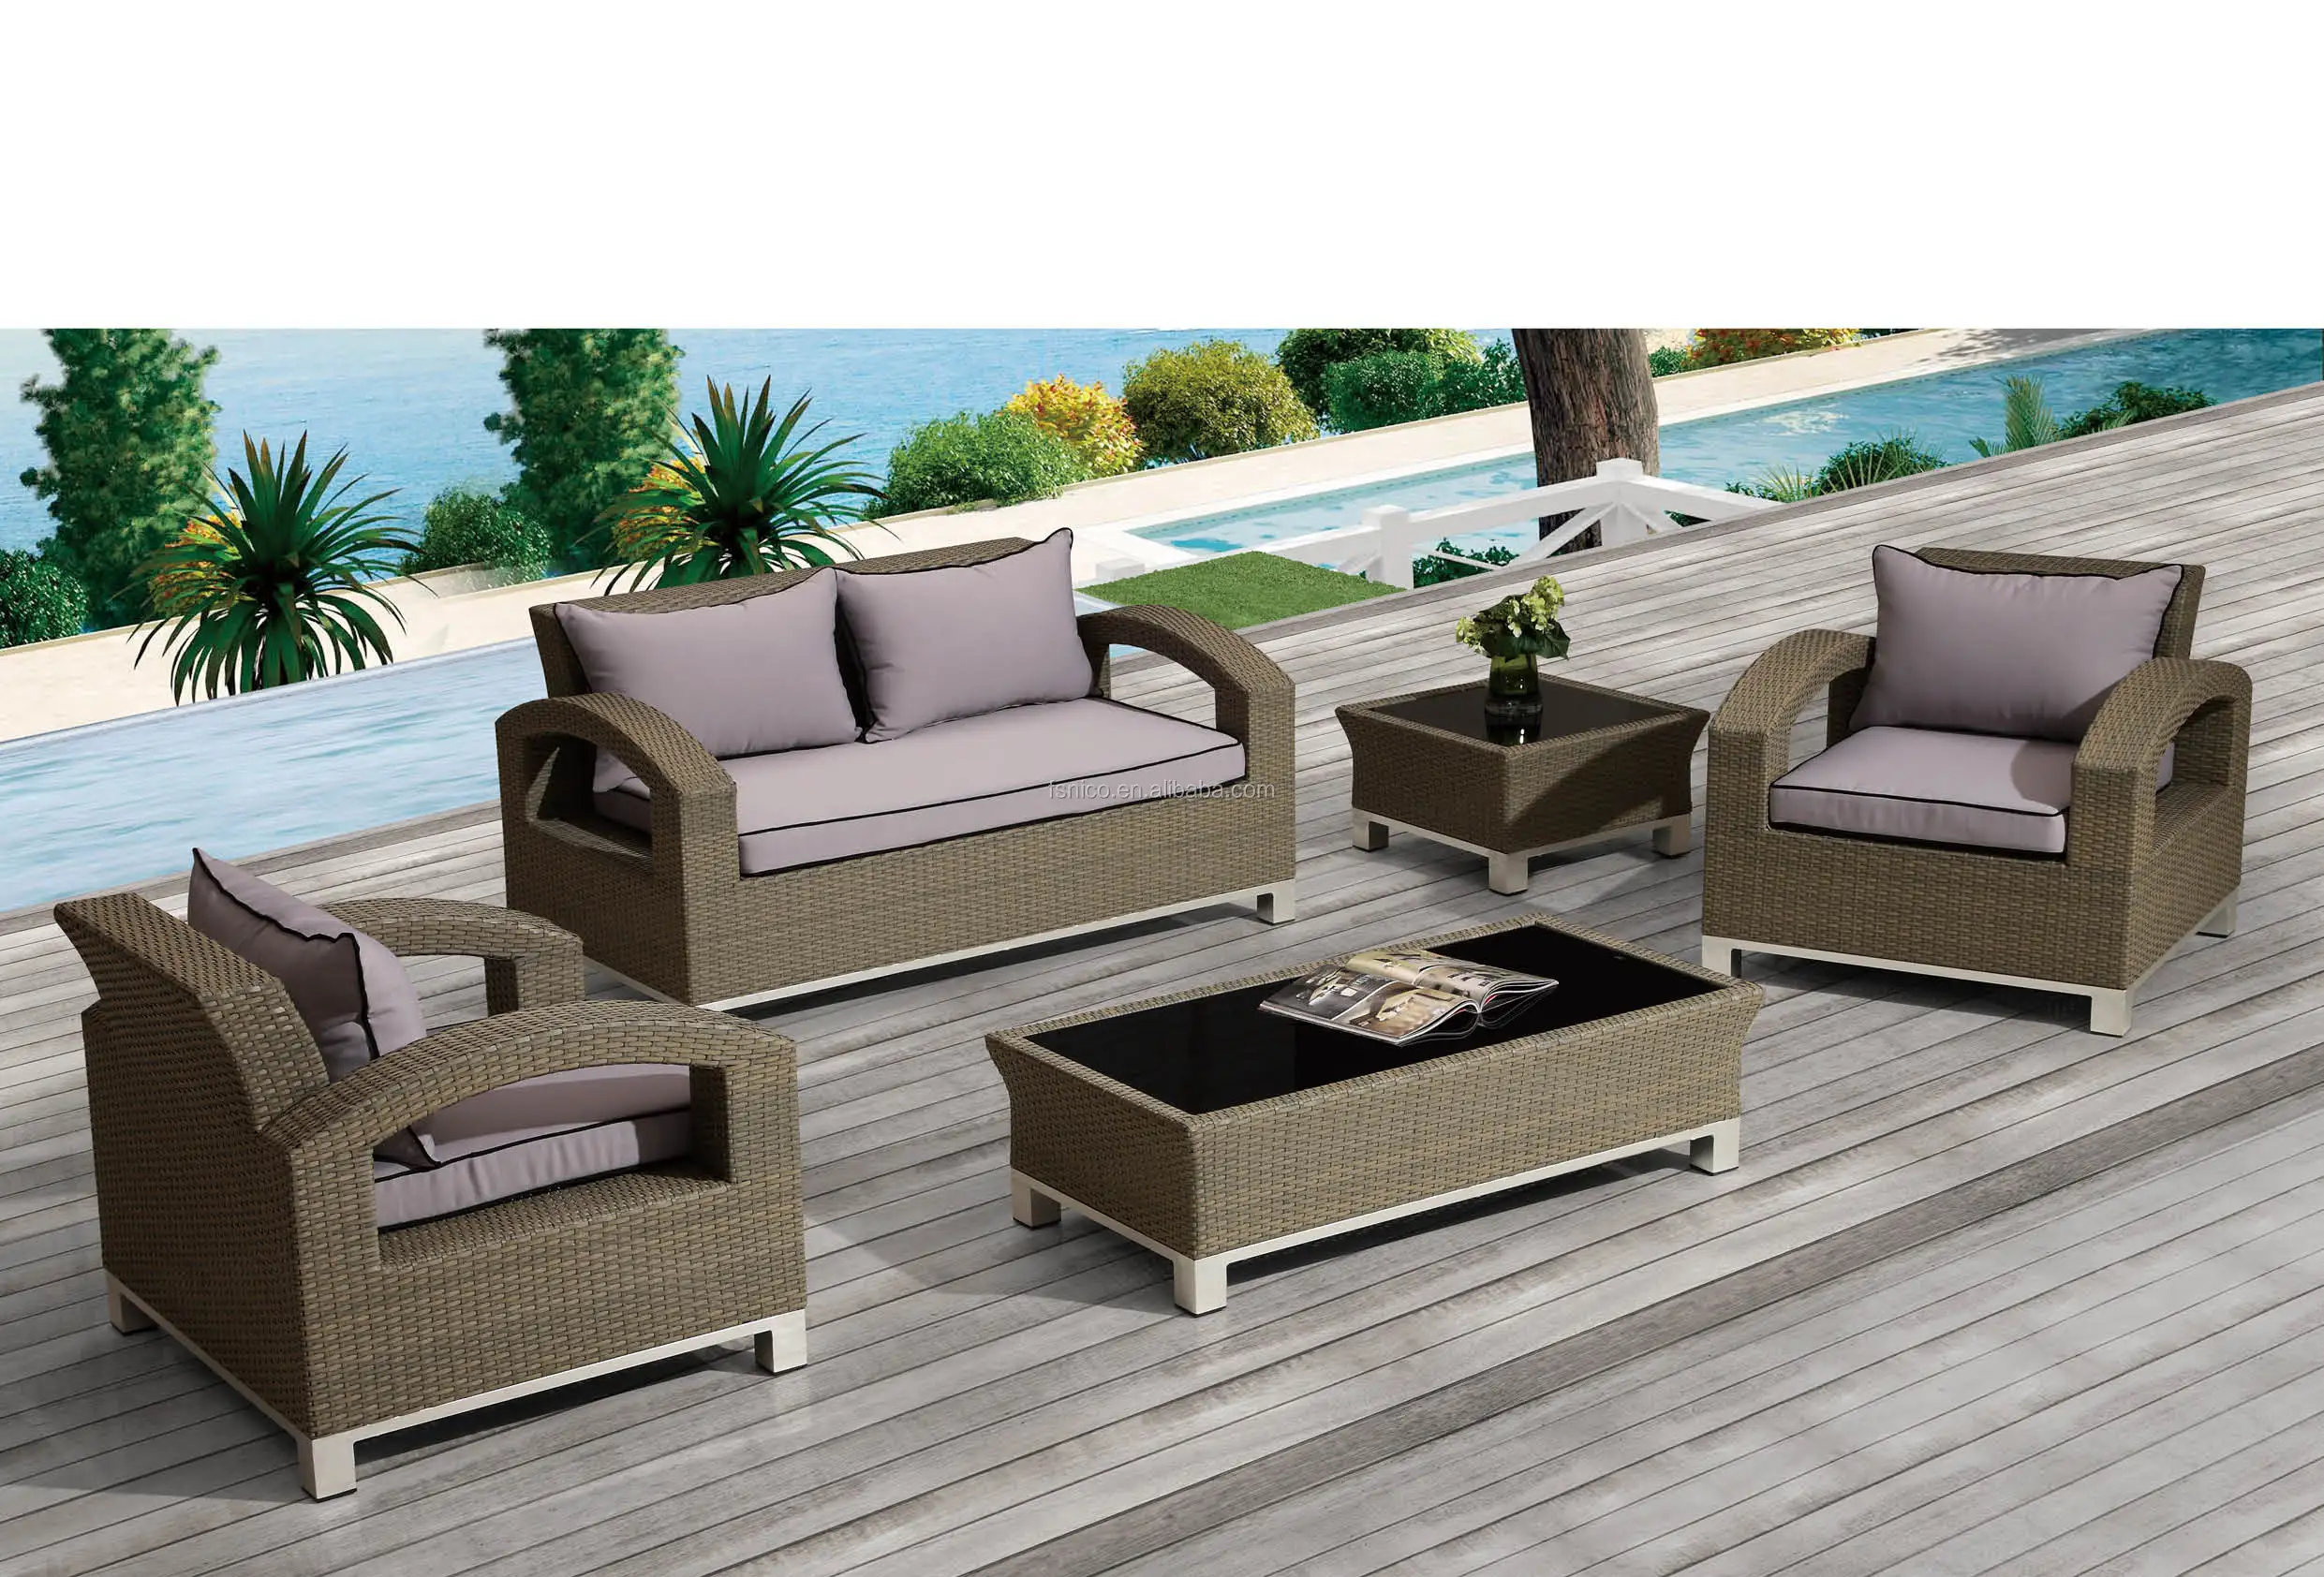 lowes modern patio broyhill outdoor furniture extra large garden set